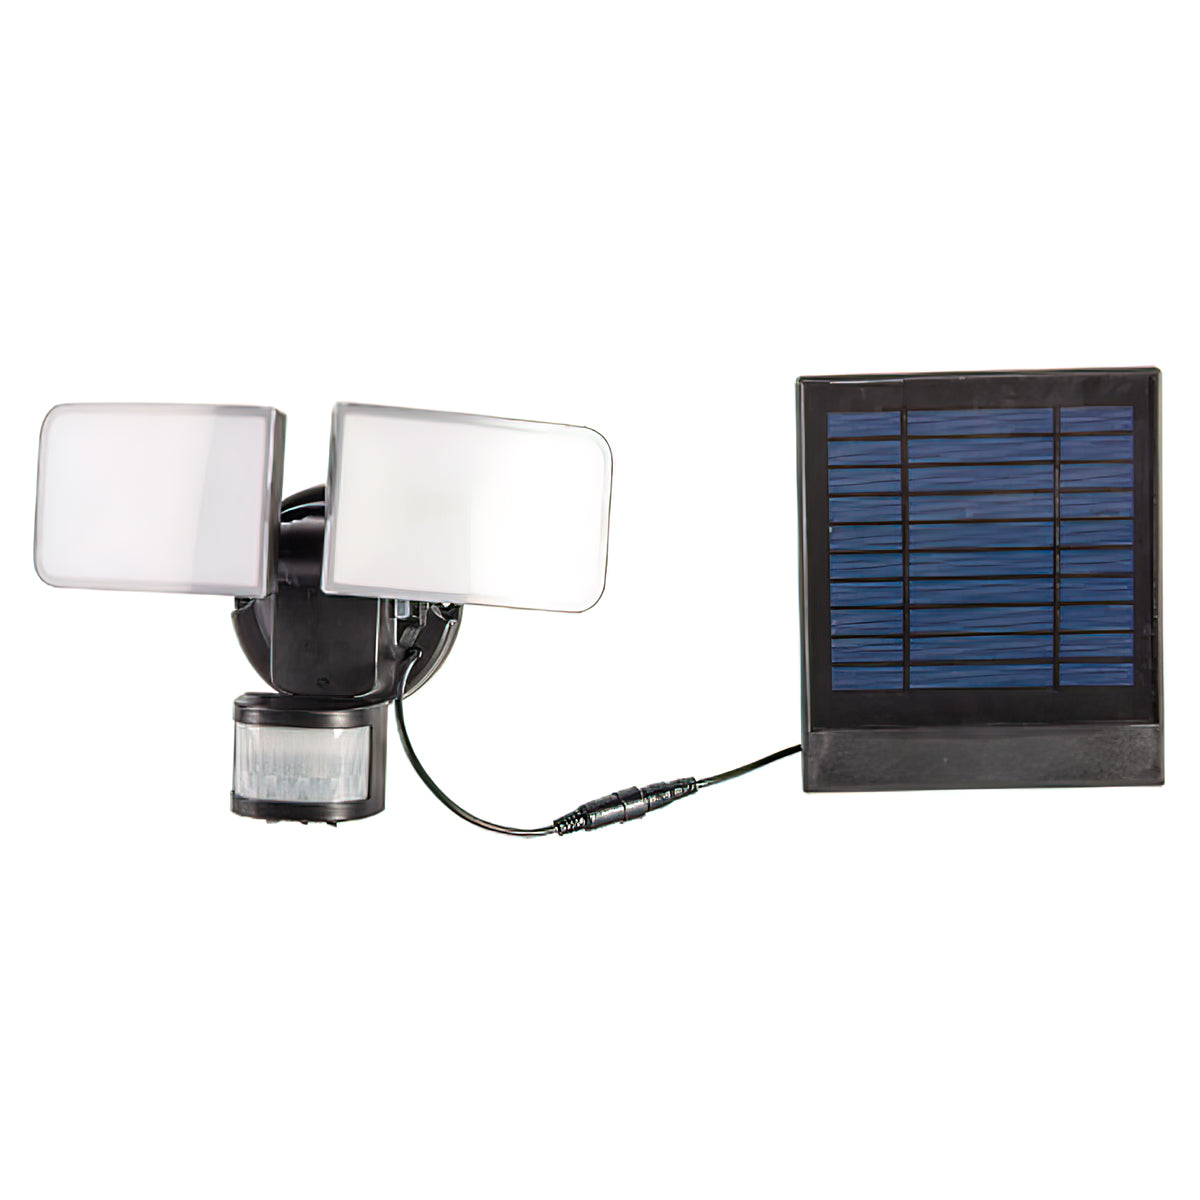 LED Security Flood Light With Photocell and Motion Sensor, 1000 Lumens, Solar Powered, Adjustable 2-Head, White Finish